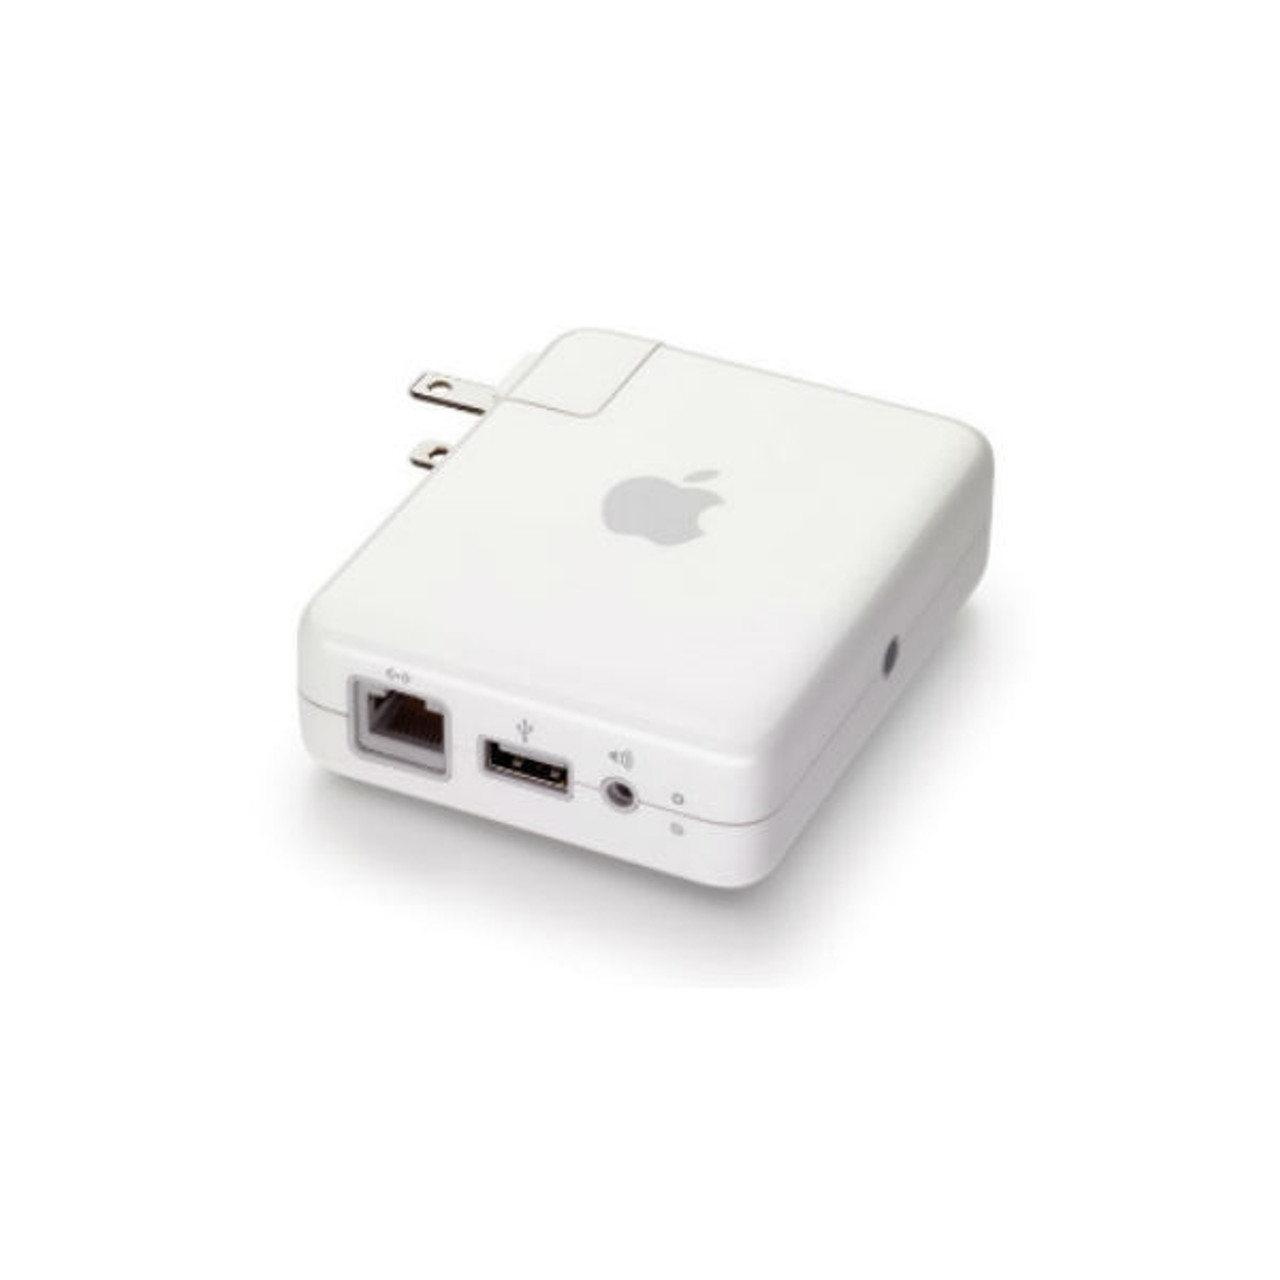 Som Pump Bred vifte Apple AirPort Express Router 802.11n (1st Generation) MB321LL/A 1 | mac of  all trades